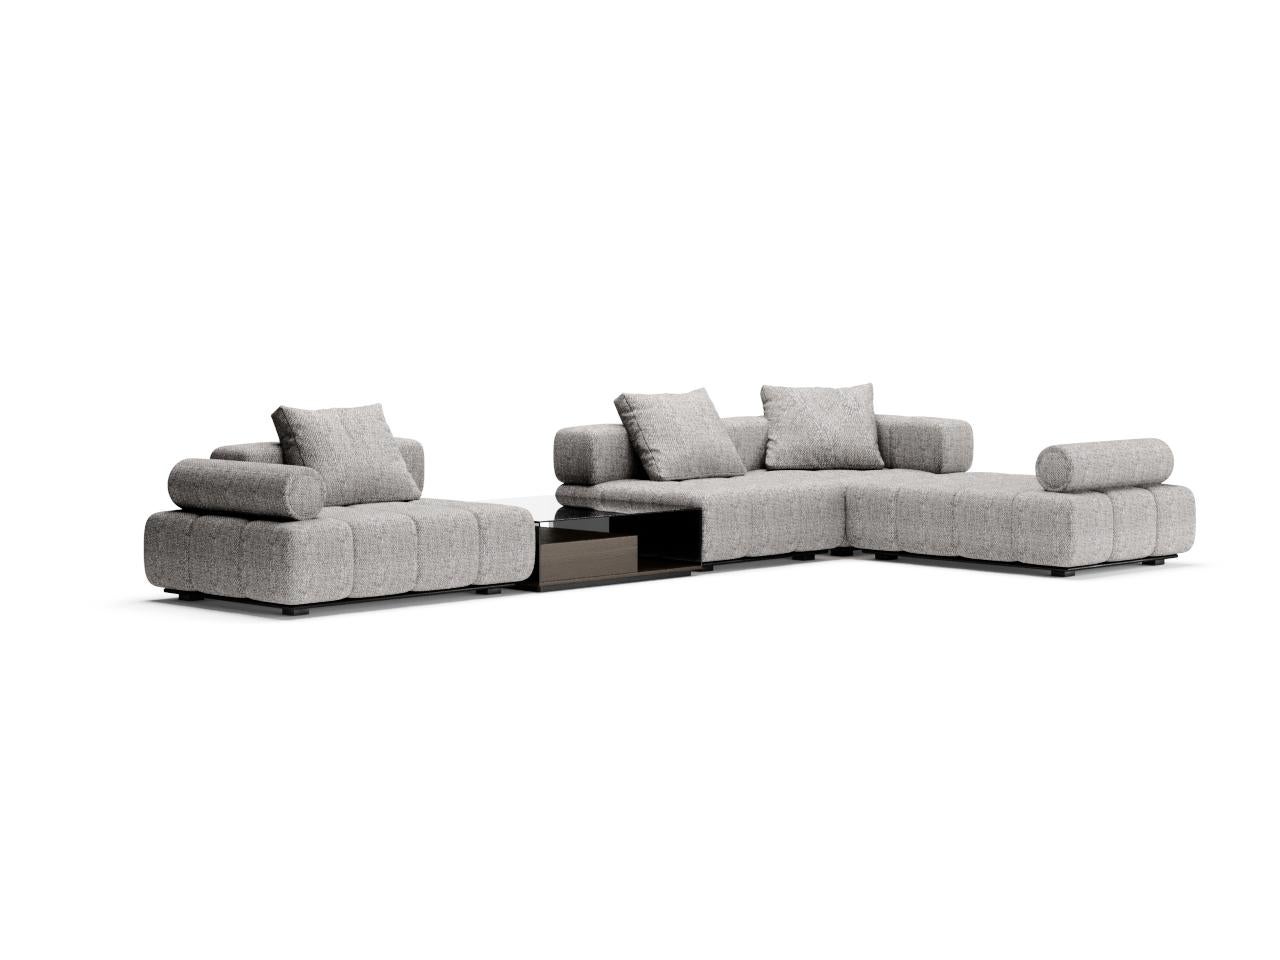 Thomas contemporary modular sofa. Available in different sizes and coverings. The seating system is composed of 5 different dimension sets. 105 - 140 - 175 x 105 x 40 cm, daybed and chaise longue.

The seating system can be customized with a whole